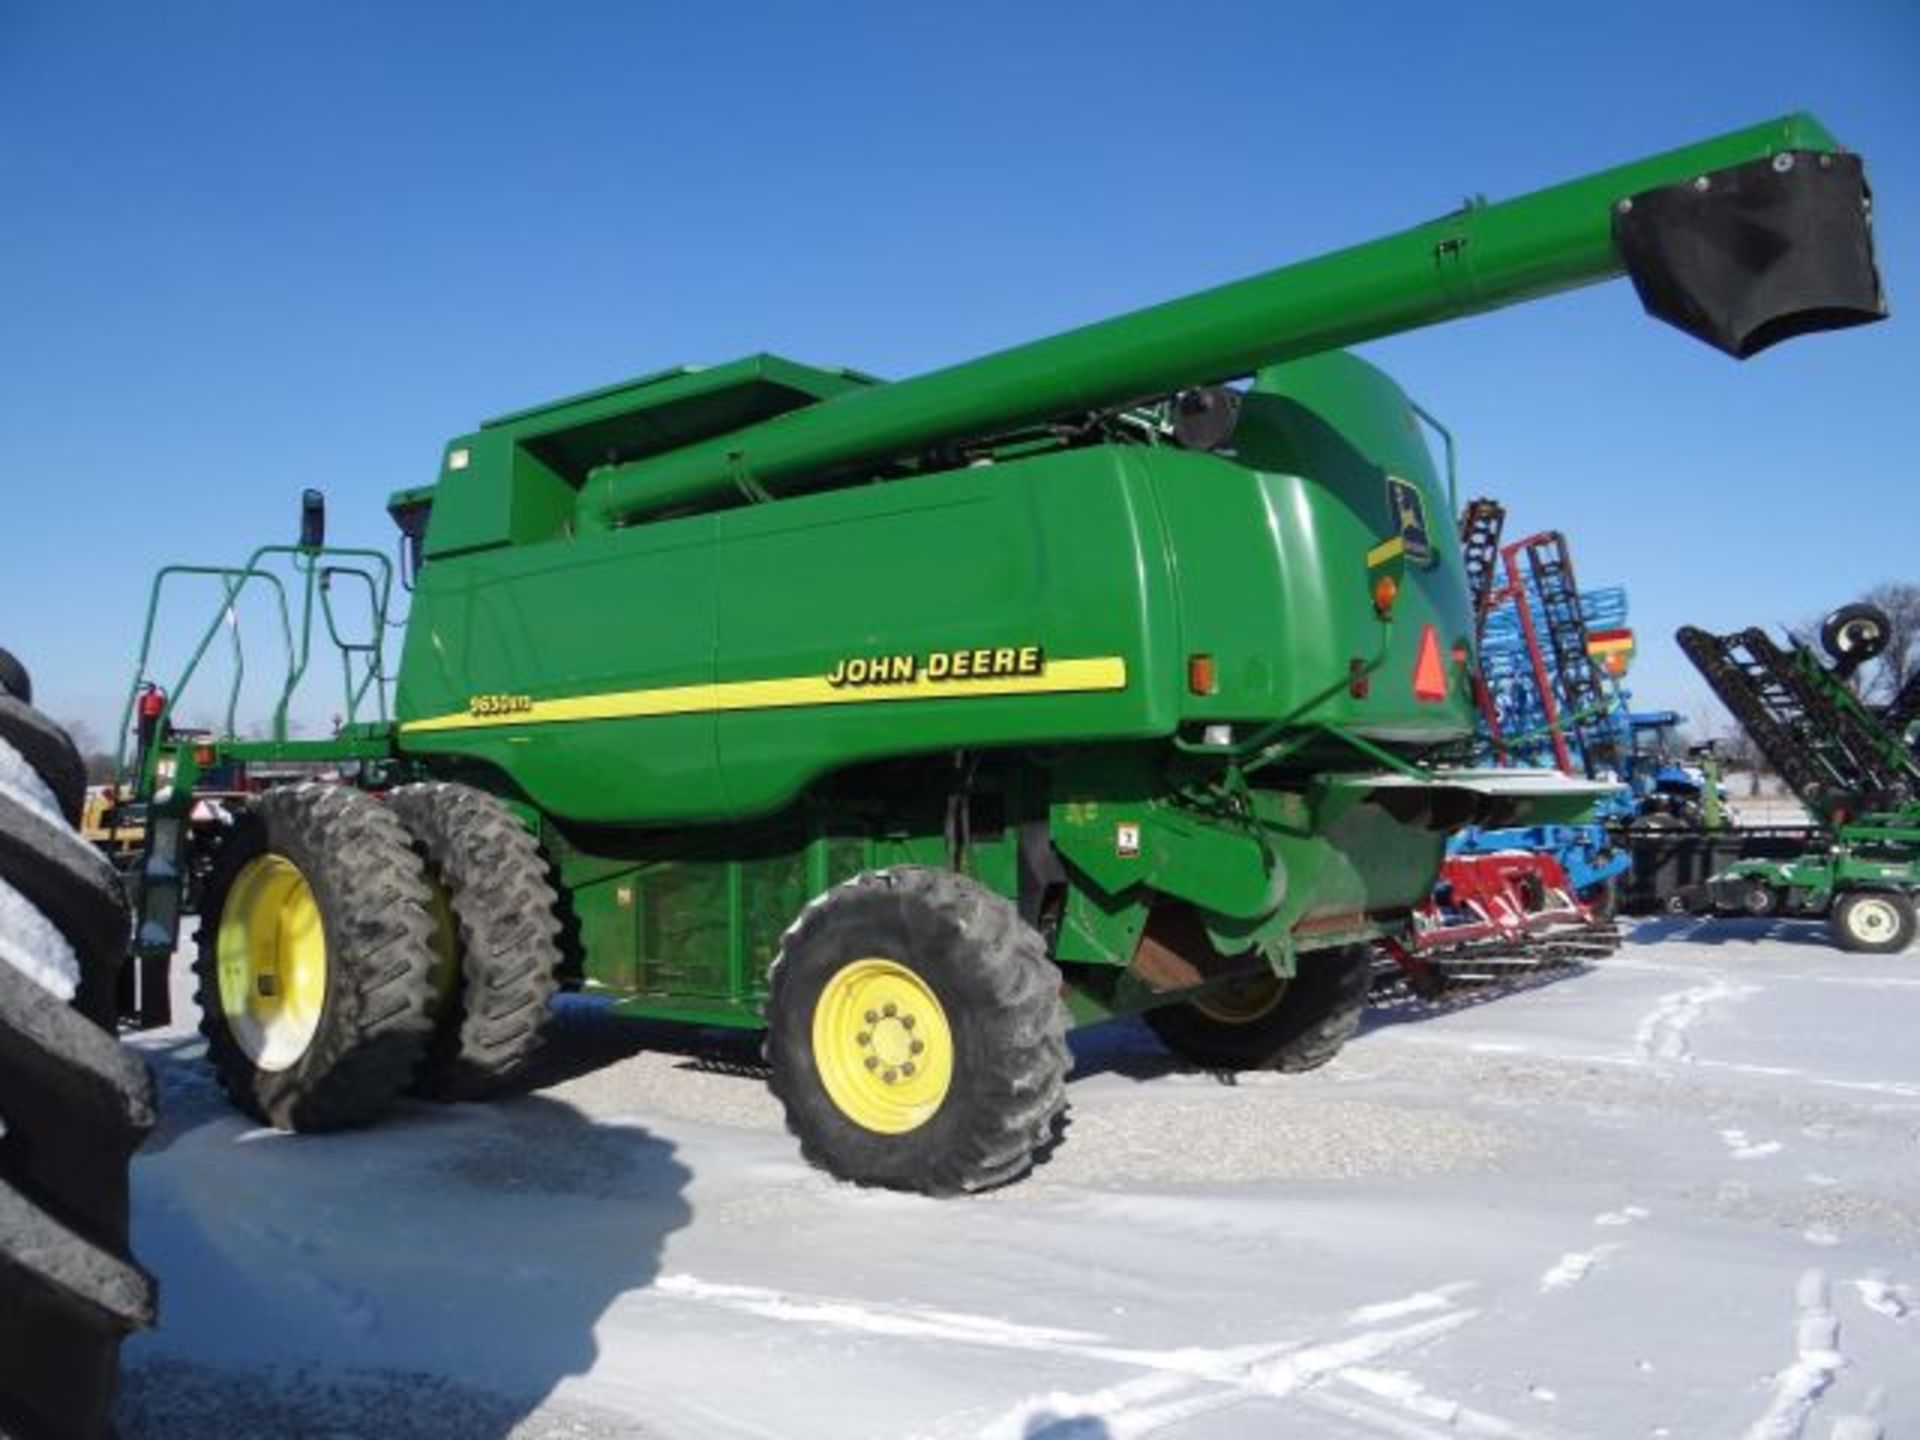 JD 9650STS Combine, 2001 #155342 Front tires Duals Goodyear 18.4x42. Rear 18.4x26. Aftermarket - Image 3 of 7